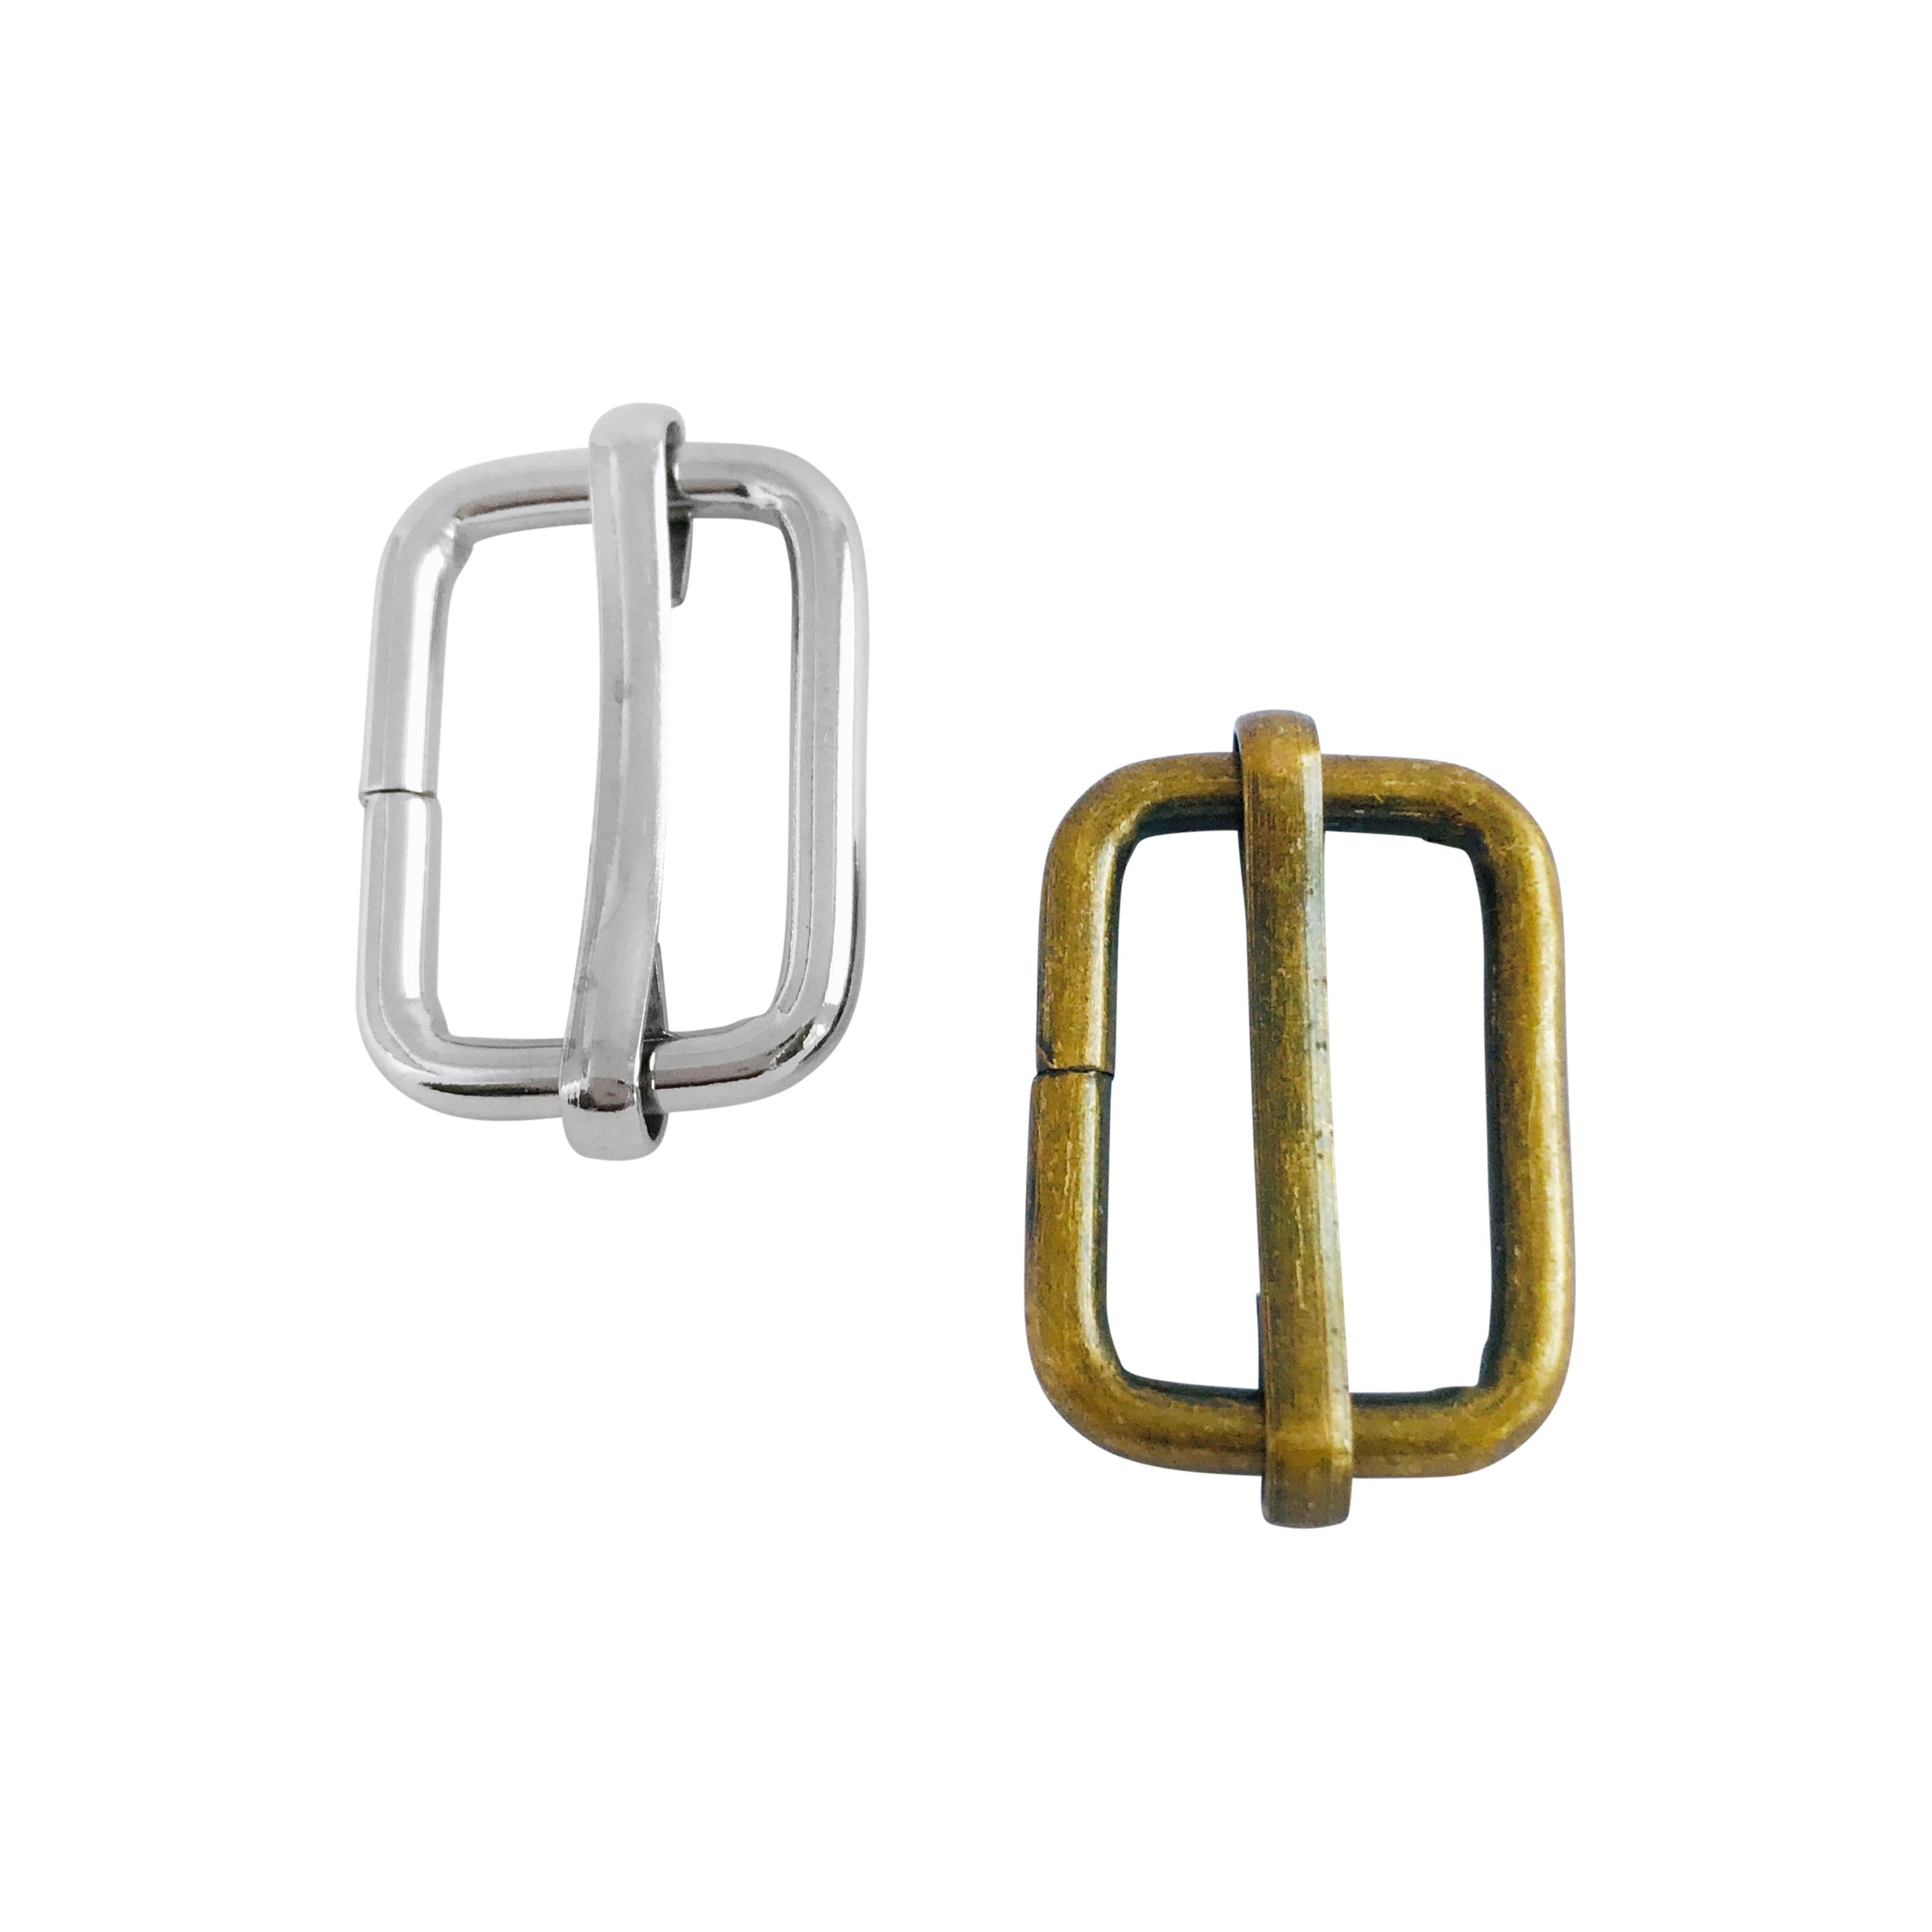 3/4" wire form slider buckle in either silver or antique brass